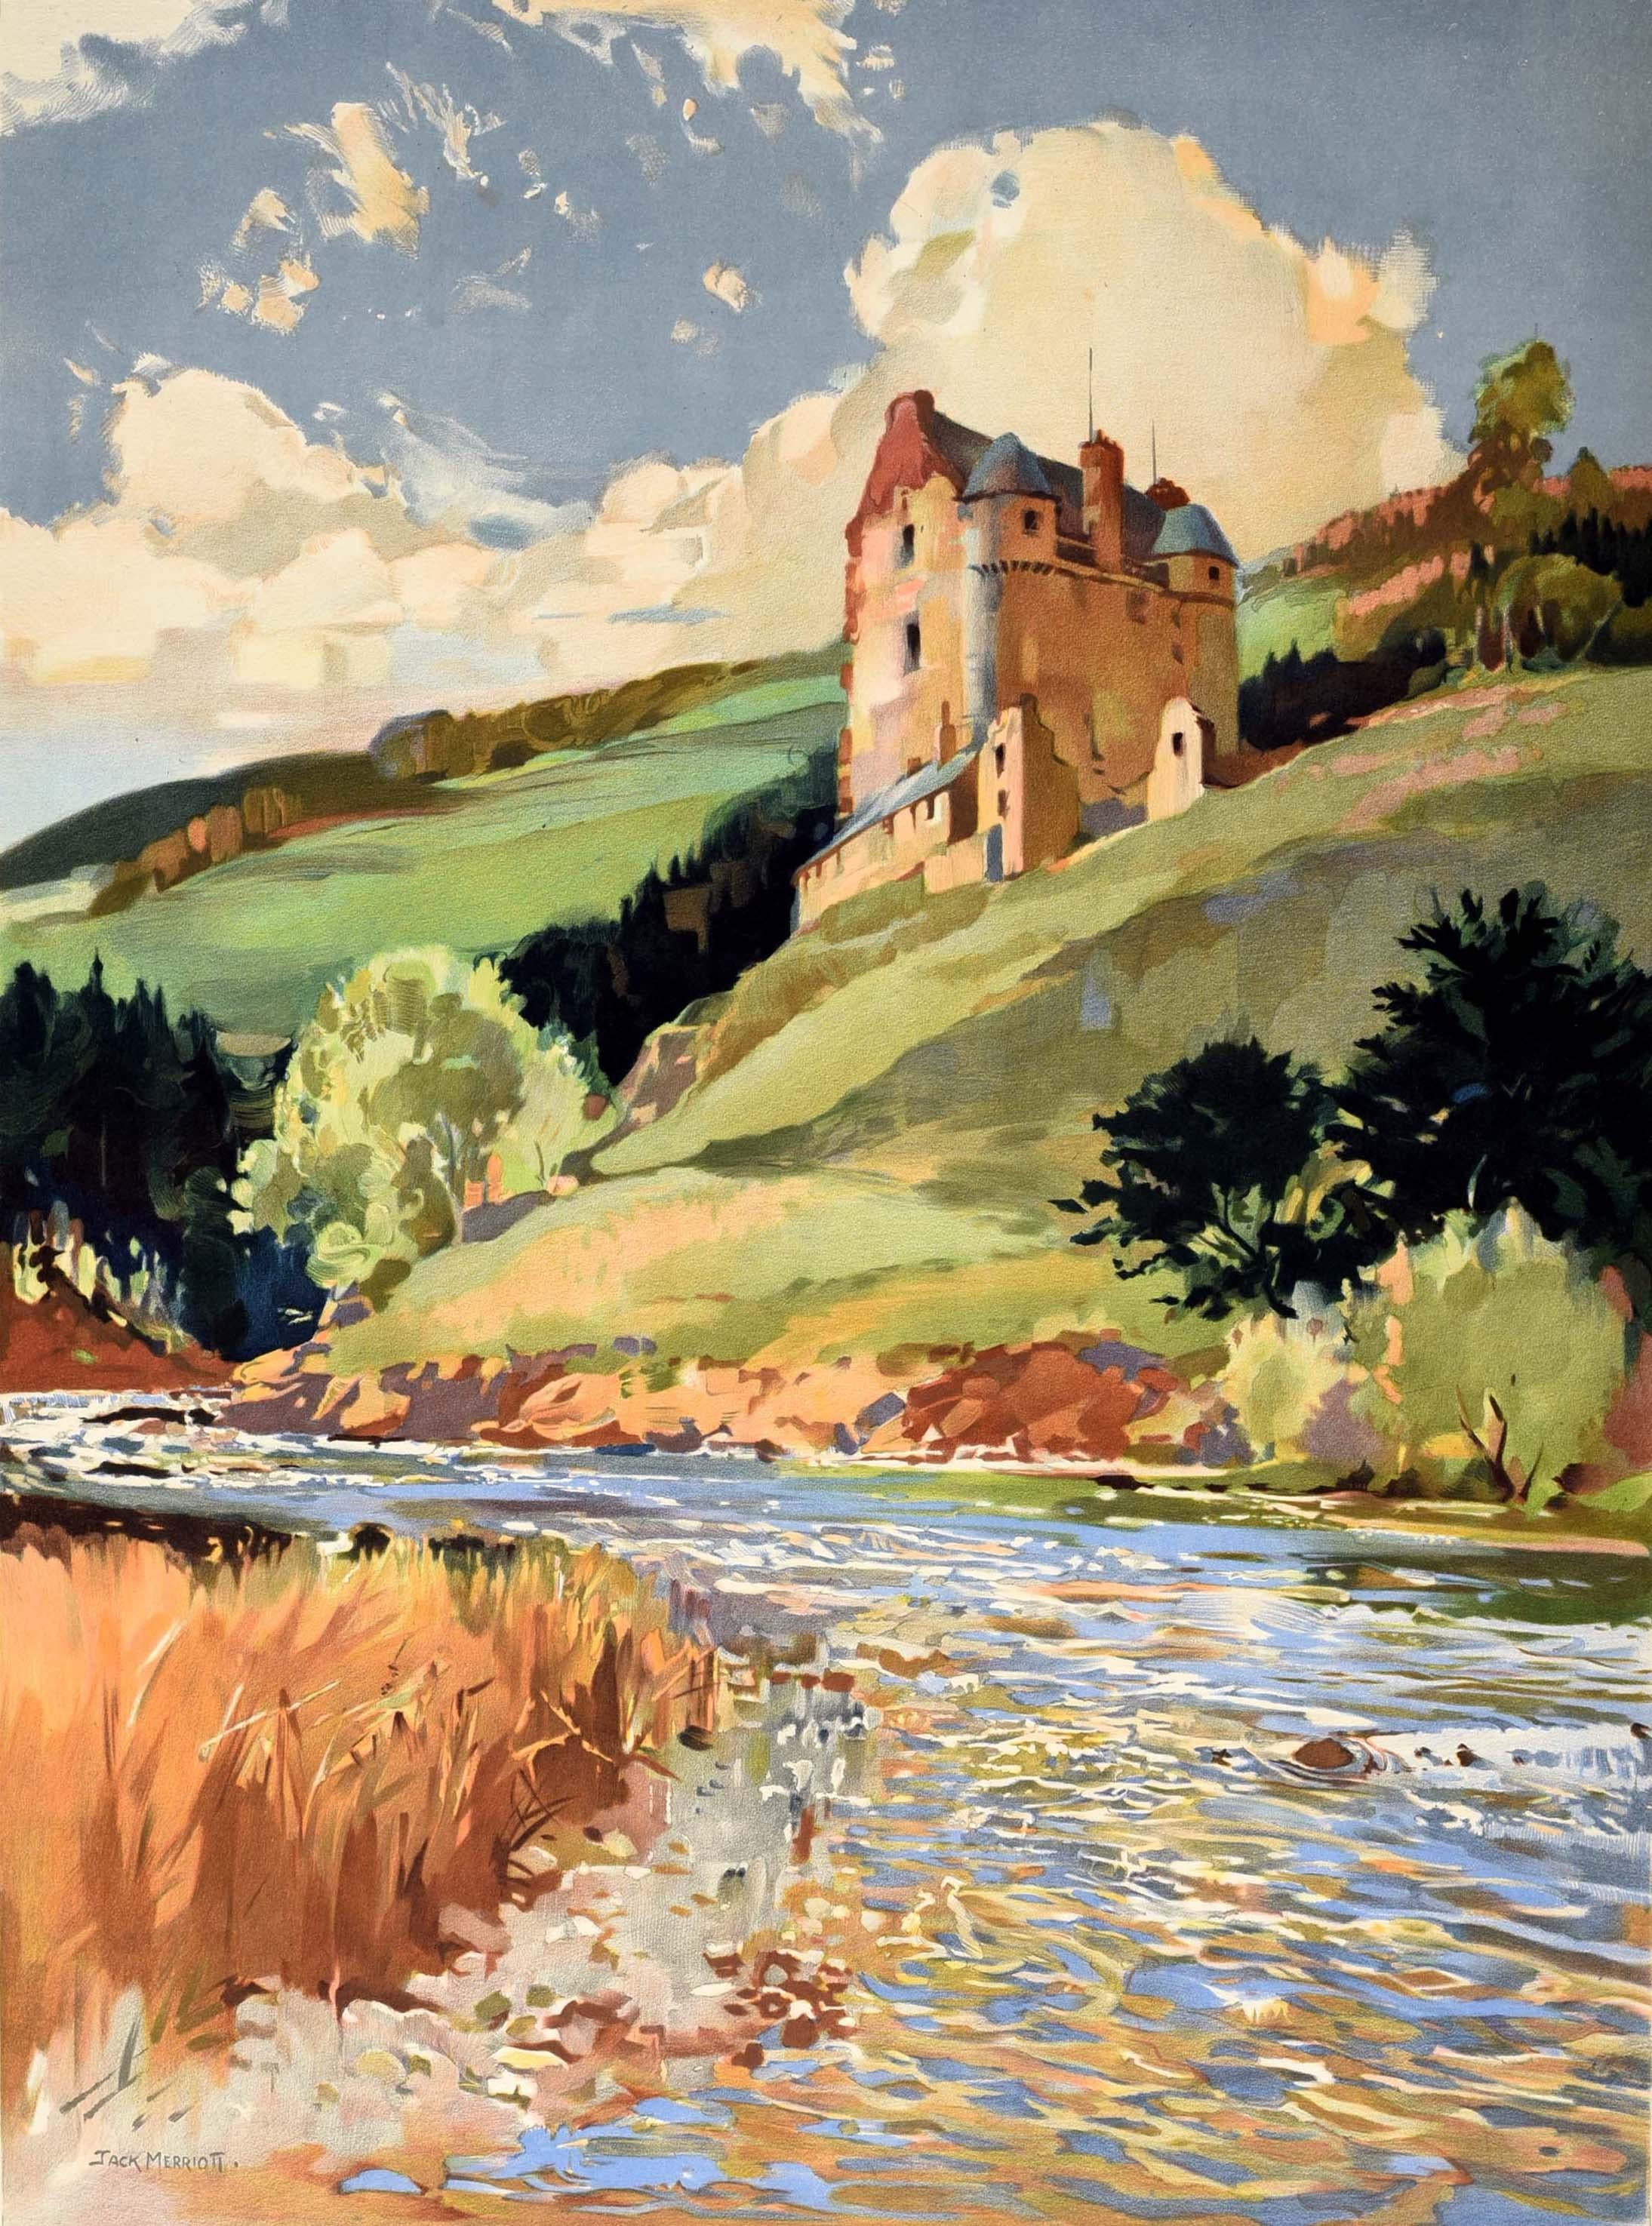 Original vintage travel poster issued by British Railways - The River Tweed See Scotland by Train - featuring a painting by the British artist Jack Merriott (1901-1968) depicting a scenic view of the historic tower house Neidpath Castle in